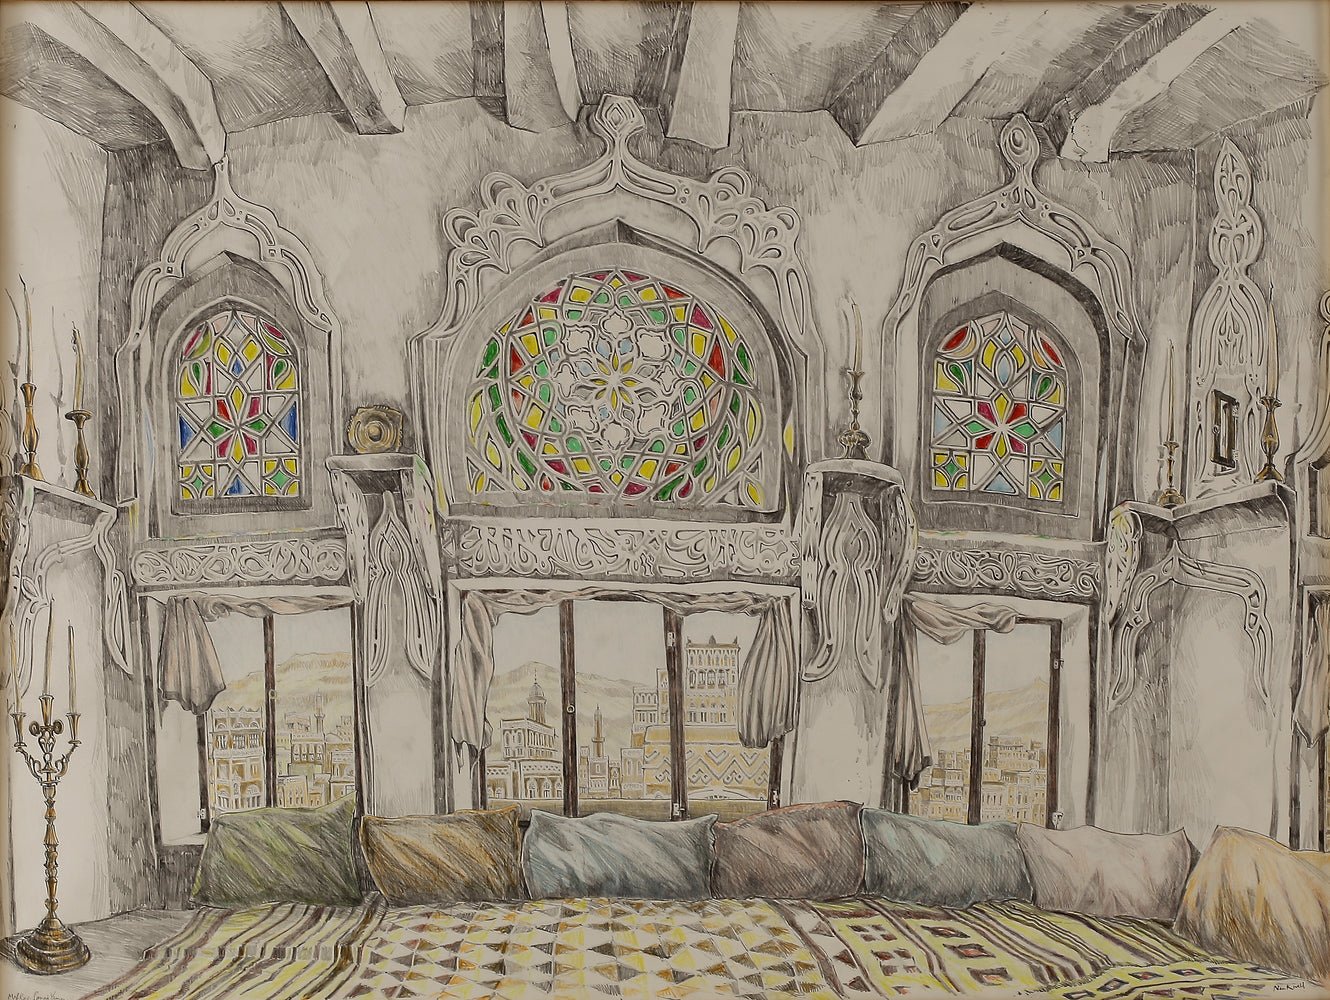 View from a Maf Raj, Sanaa, Yemen  Paper Art Pencil and crayon on paper by John Nankivell